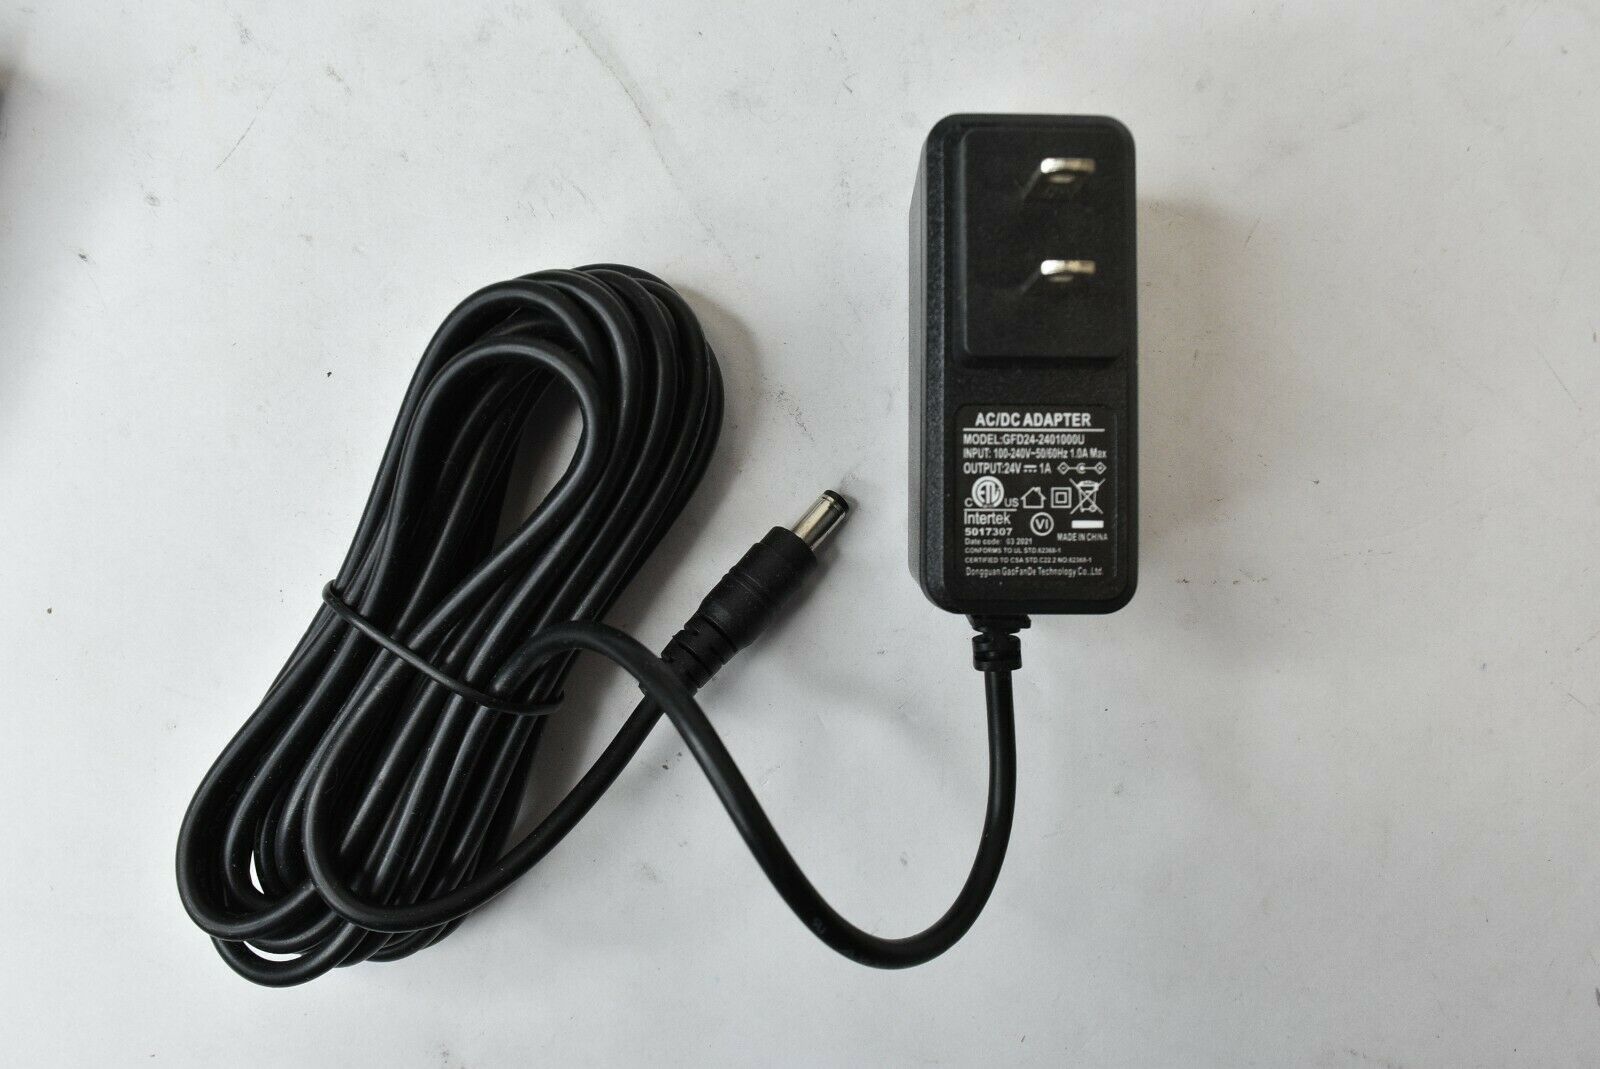 Dongguan GaoFanDe Power Supply Adapter Unit GFD24-2401000U 24V 1A Type: Adapter Features: Powered Output Voltage: 2